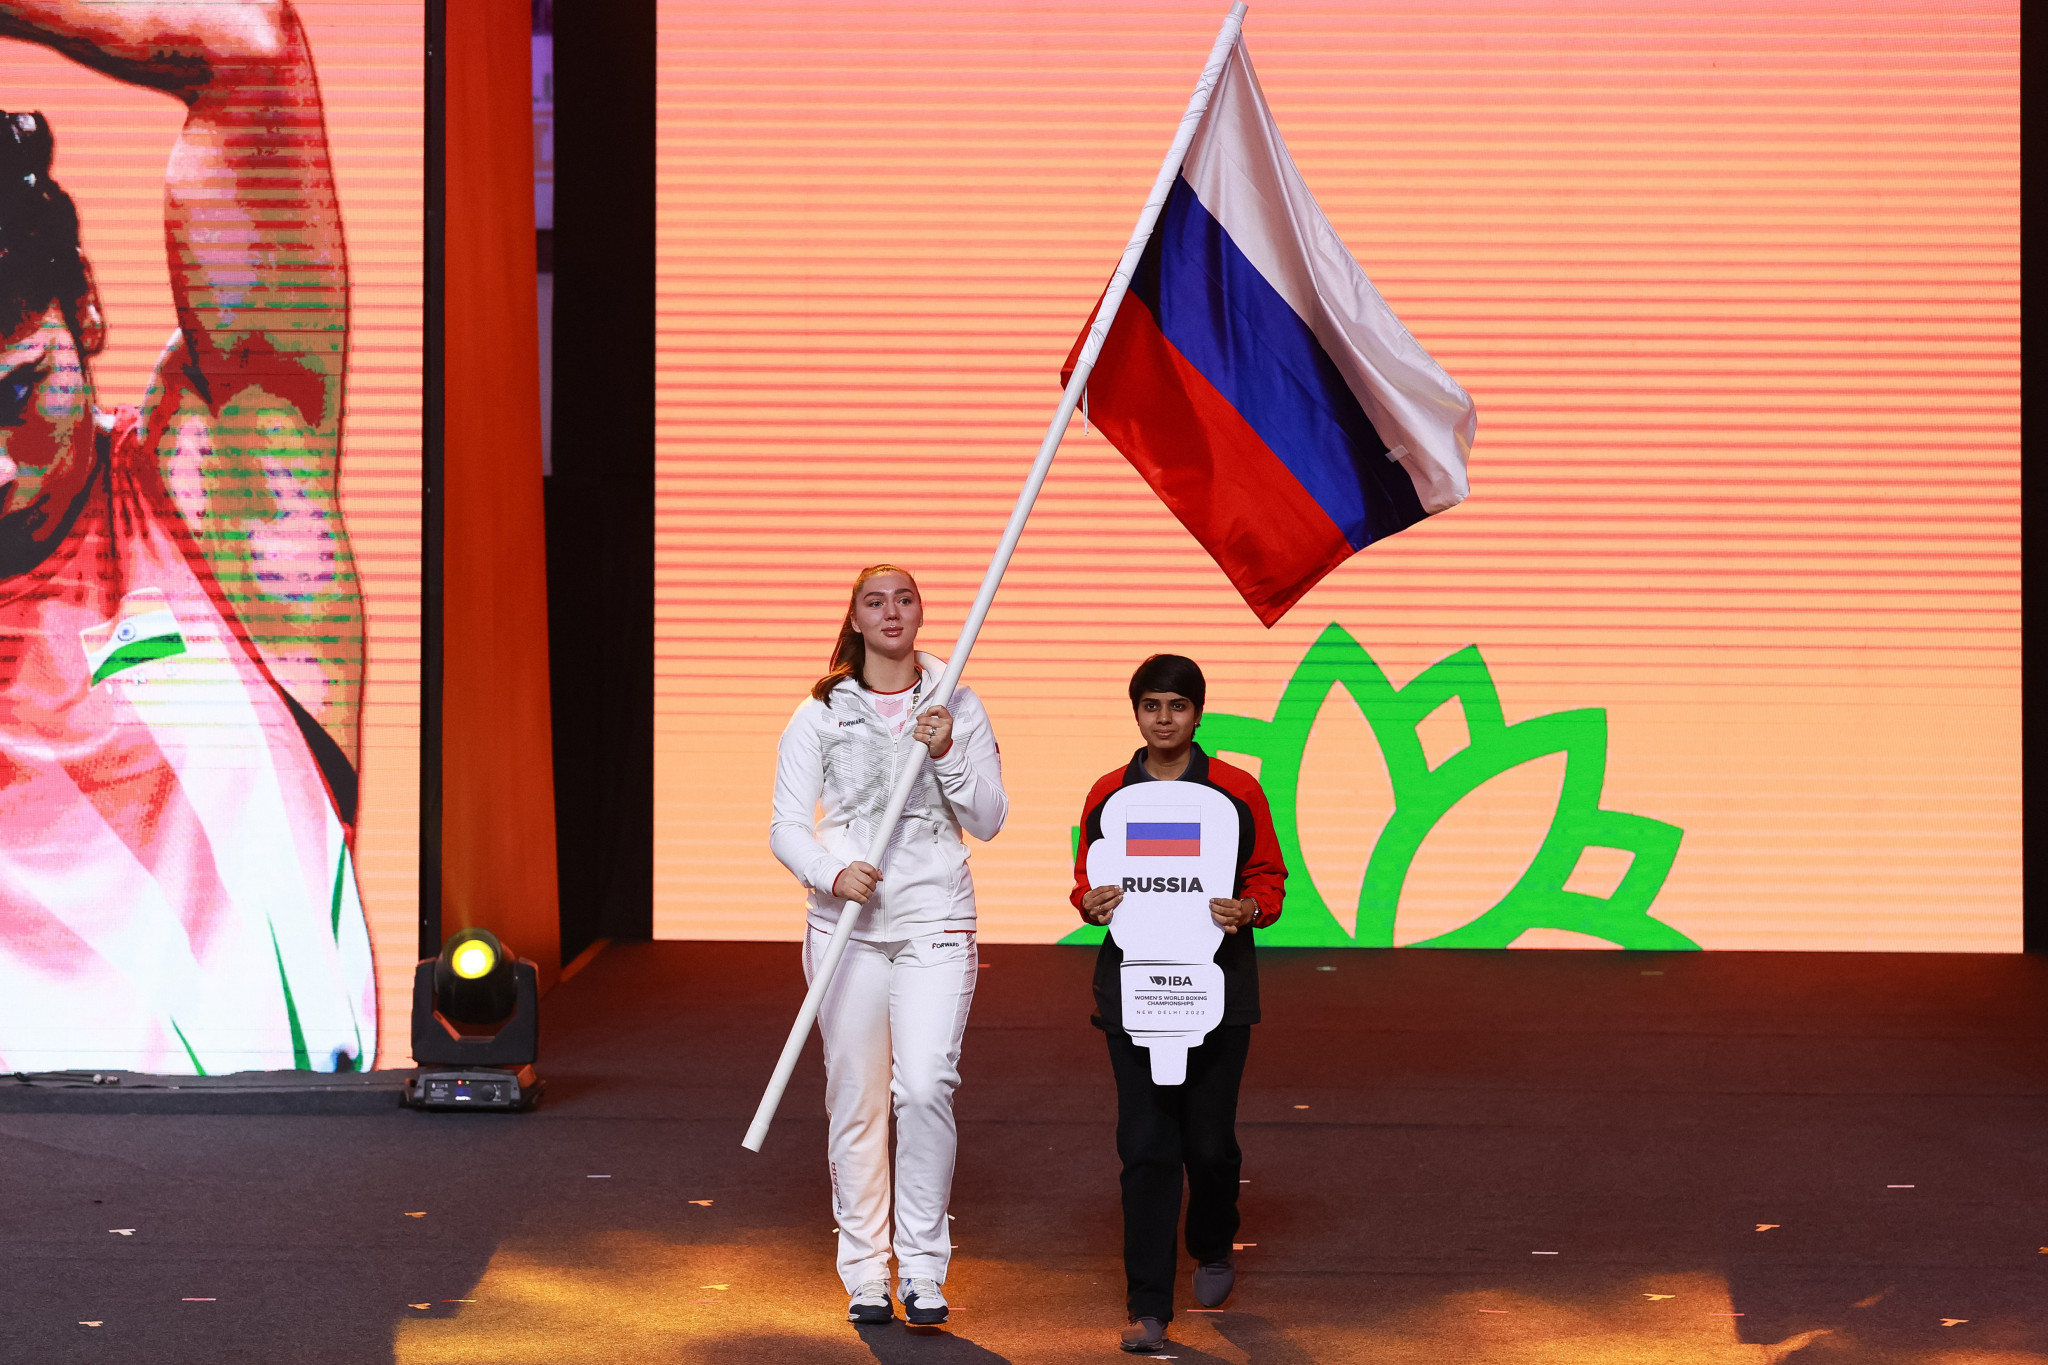 Exclusive: Matytsin says Russian flag at global events should be "normal" after attending IBA Women’s World Championships Opening Ceremony